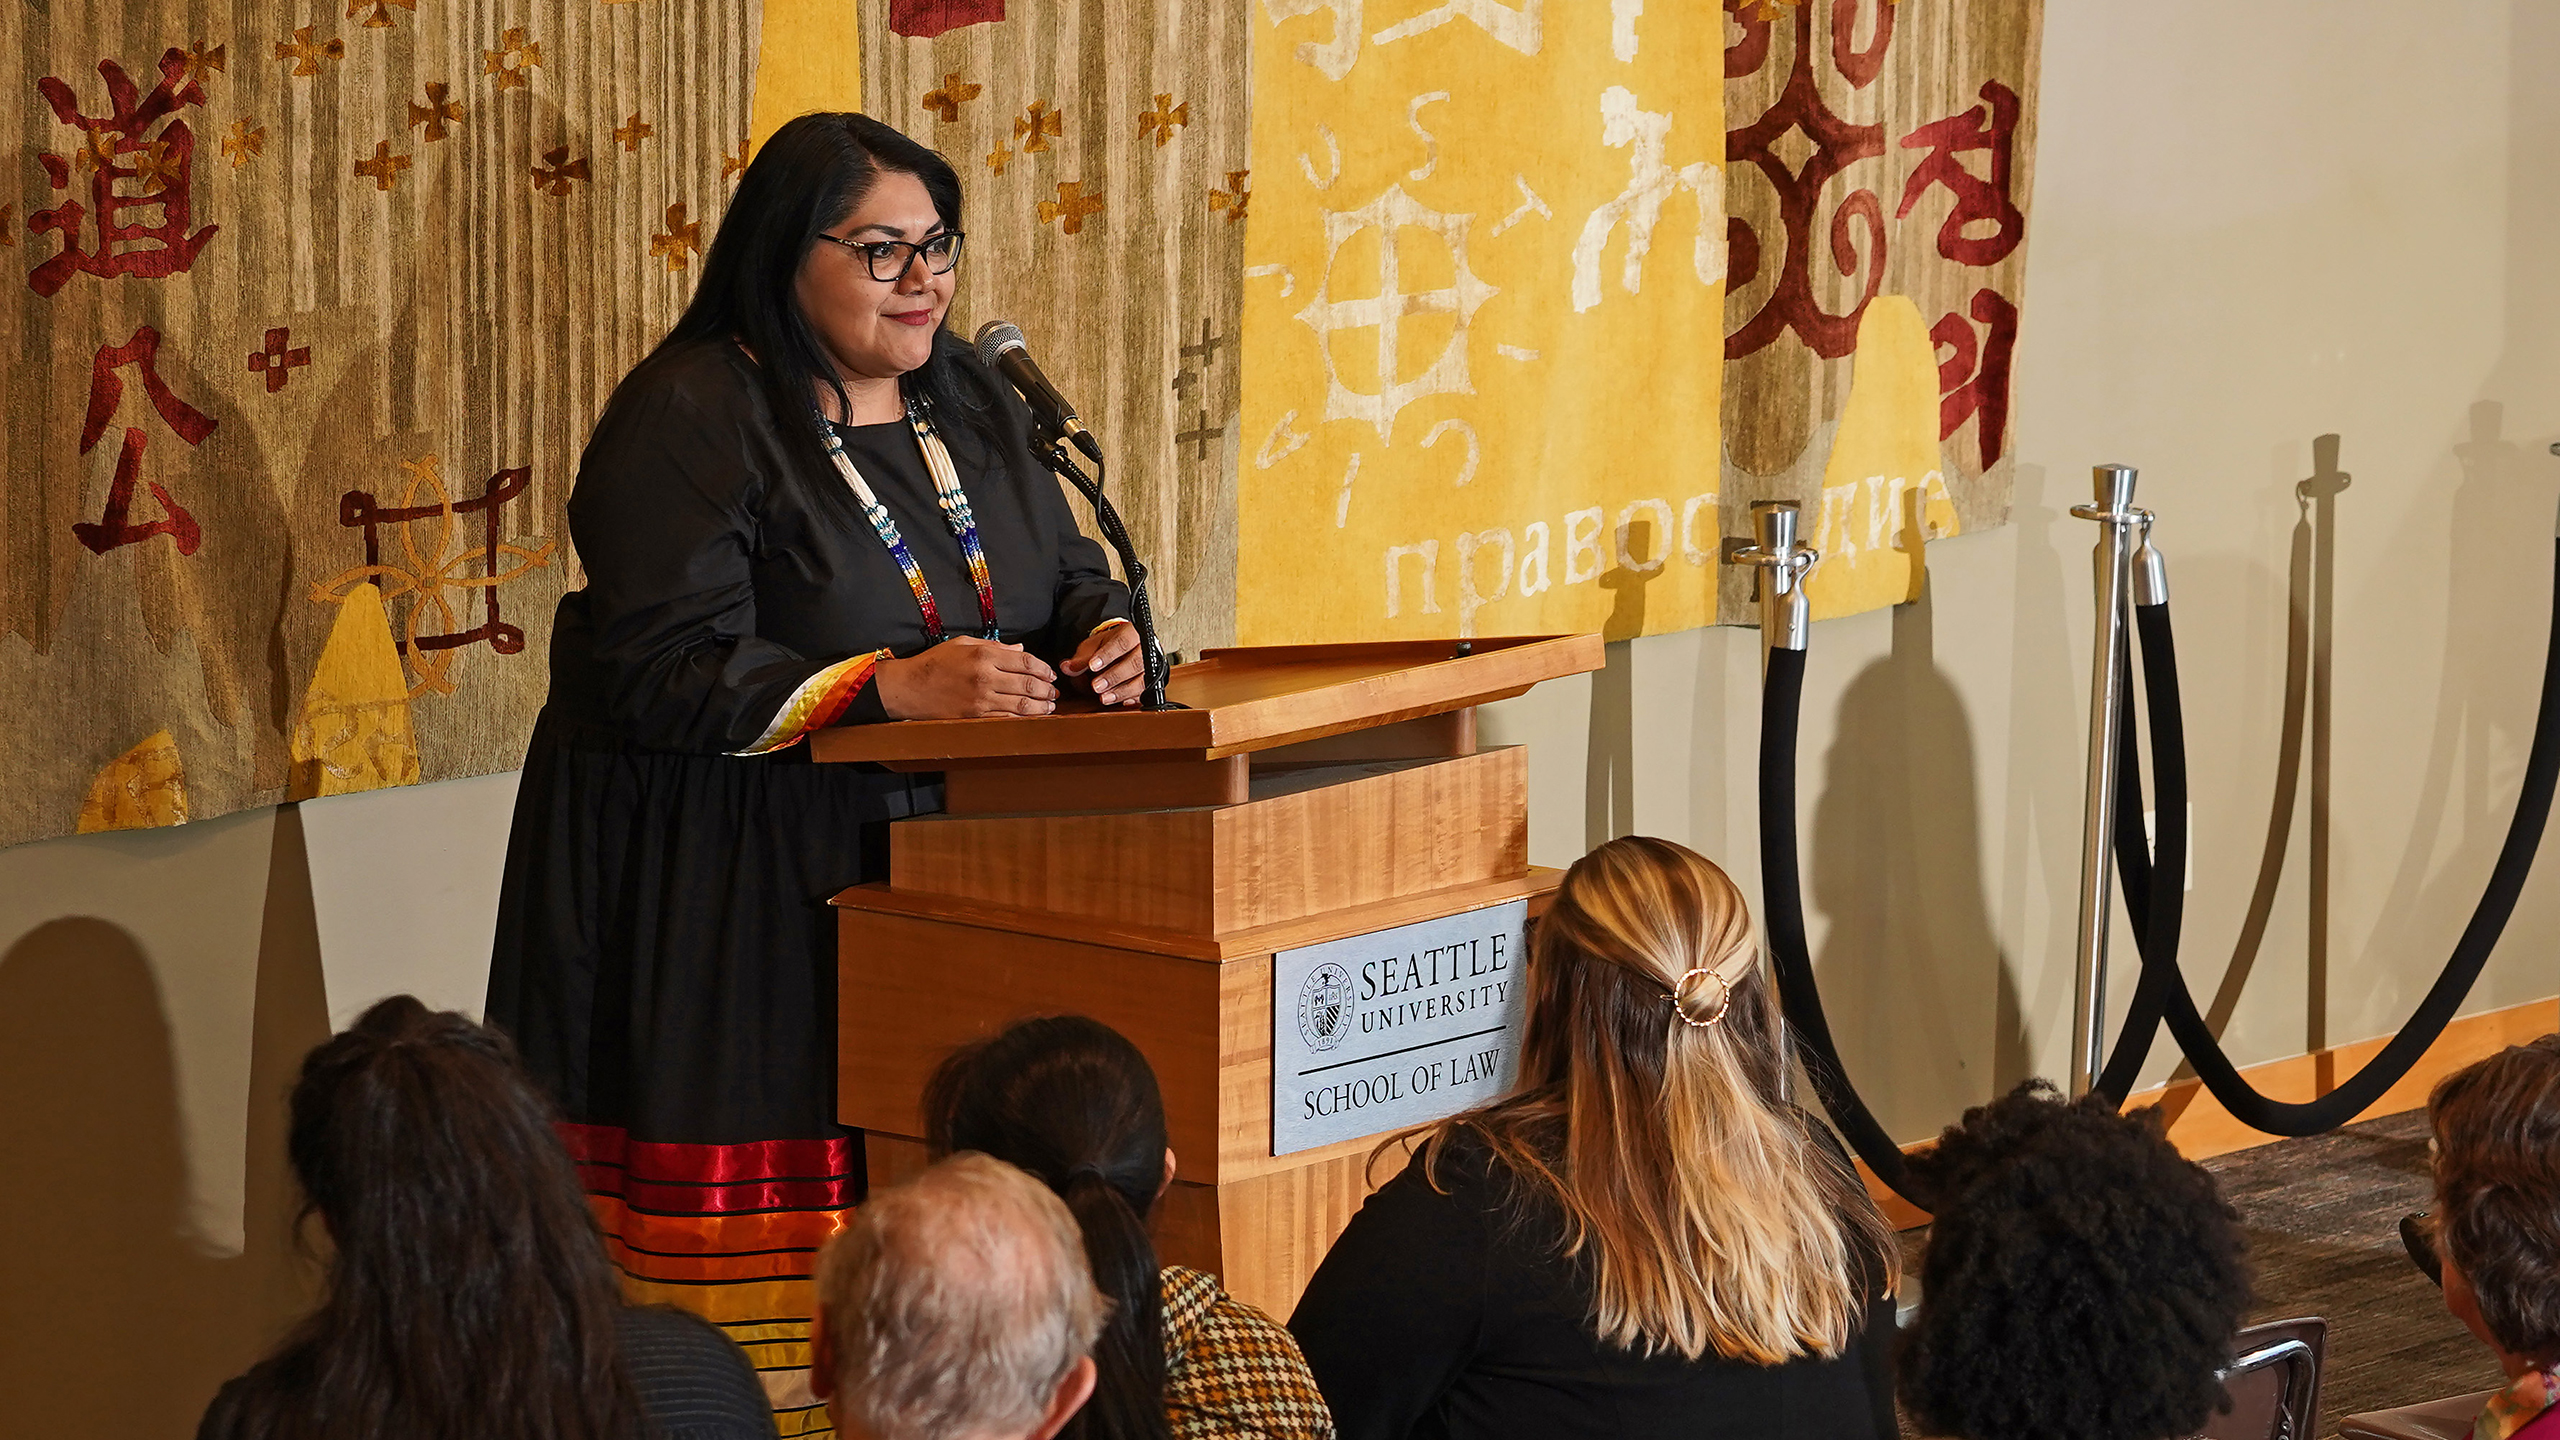 Judge Claudette White gives the keynote at the Seattle University School of Law Center for Indian Law and Policy hosted Exploring the Tribal Court System on April 4 in Seattle, Washington.    Photo by Marcus R. Donner © 2019